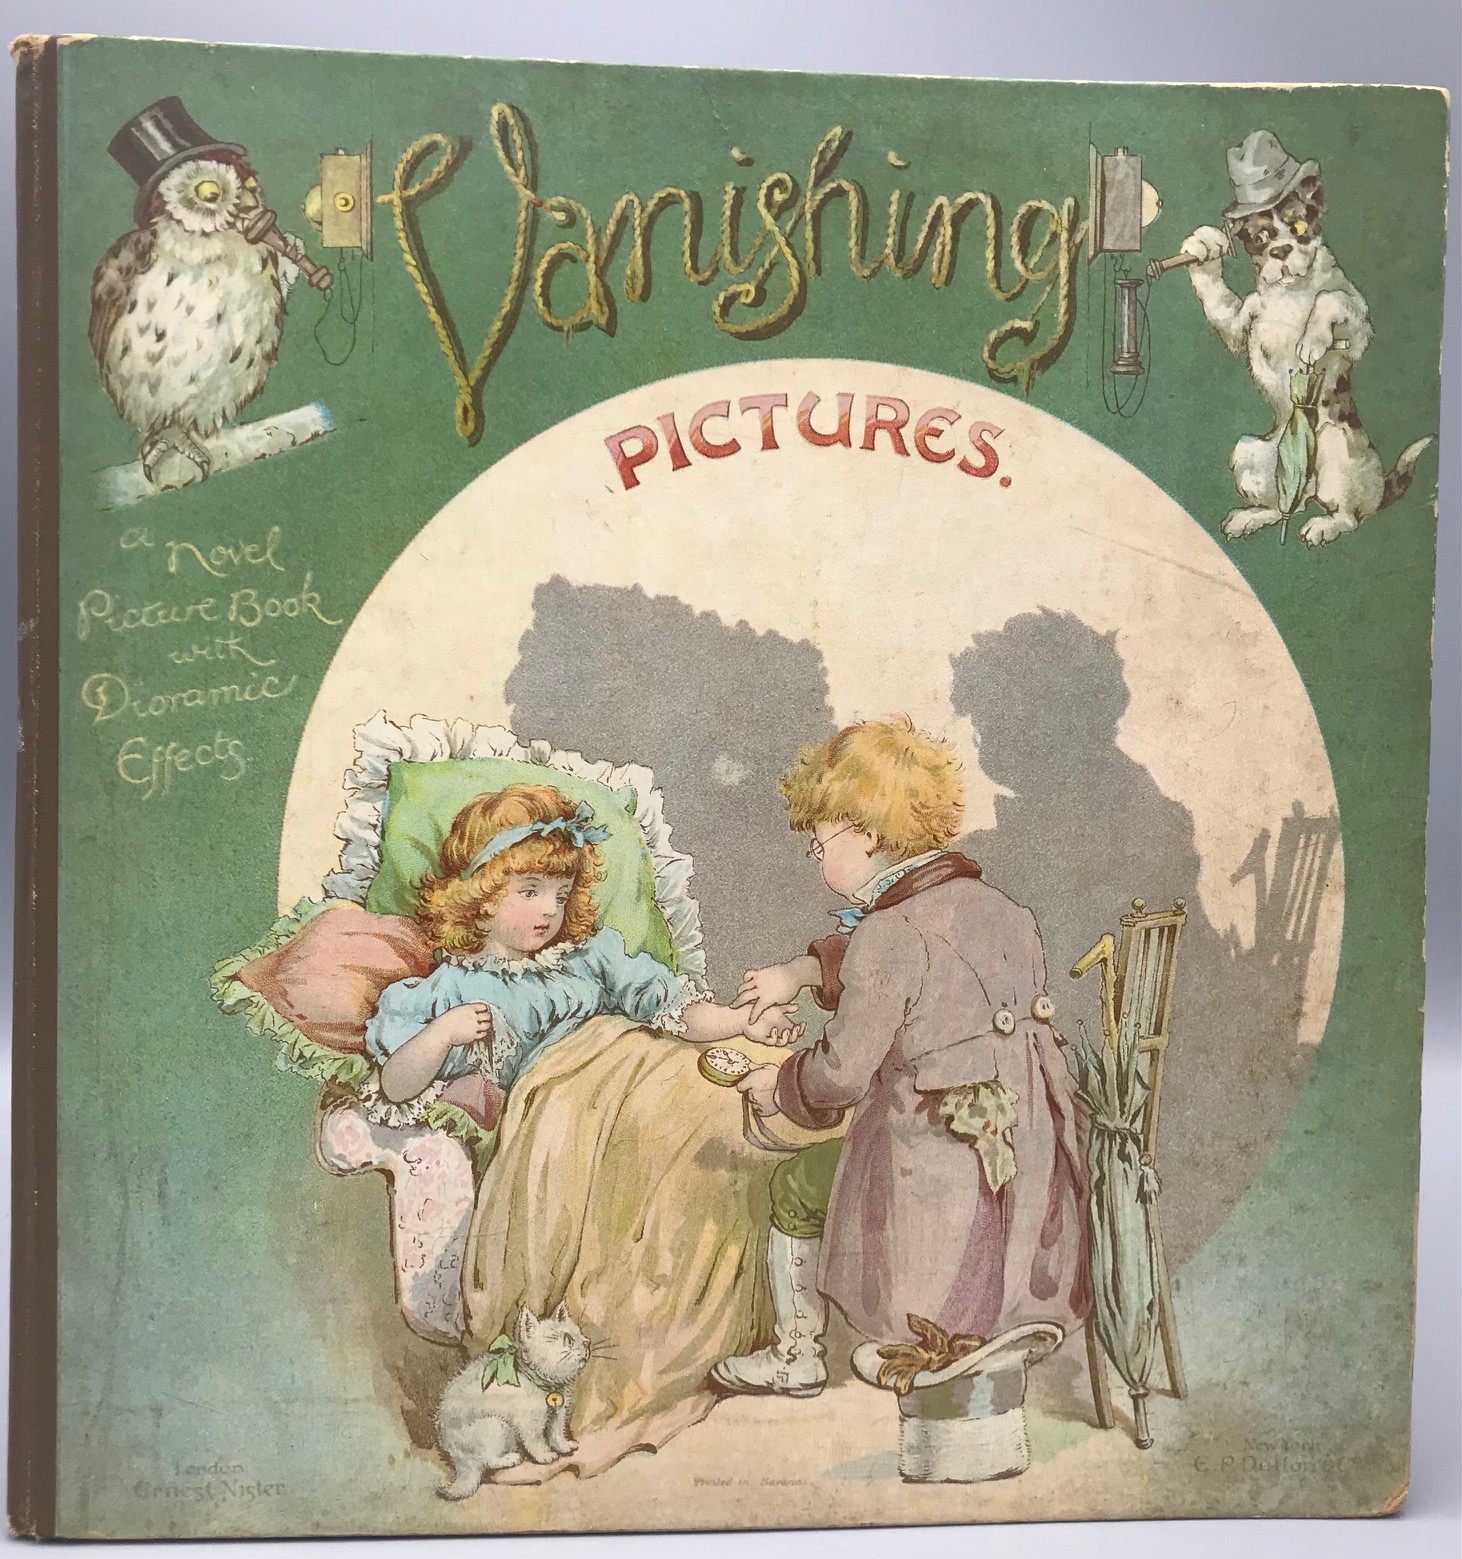 VANISHING PICTURES: A NOVEL COLOUR BOOK WITH CHANGING PICTURES, ill. by Helena Maguire - 1895 [Complete, Original]